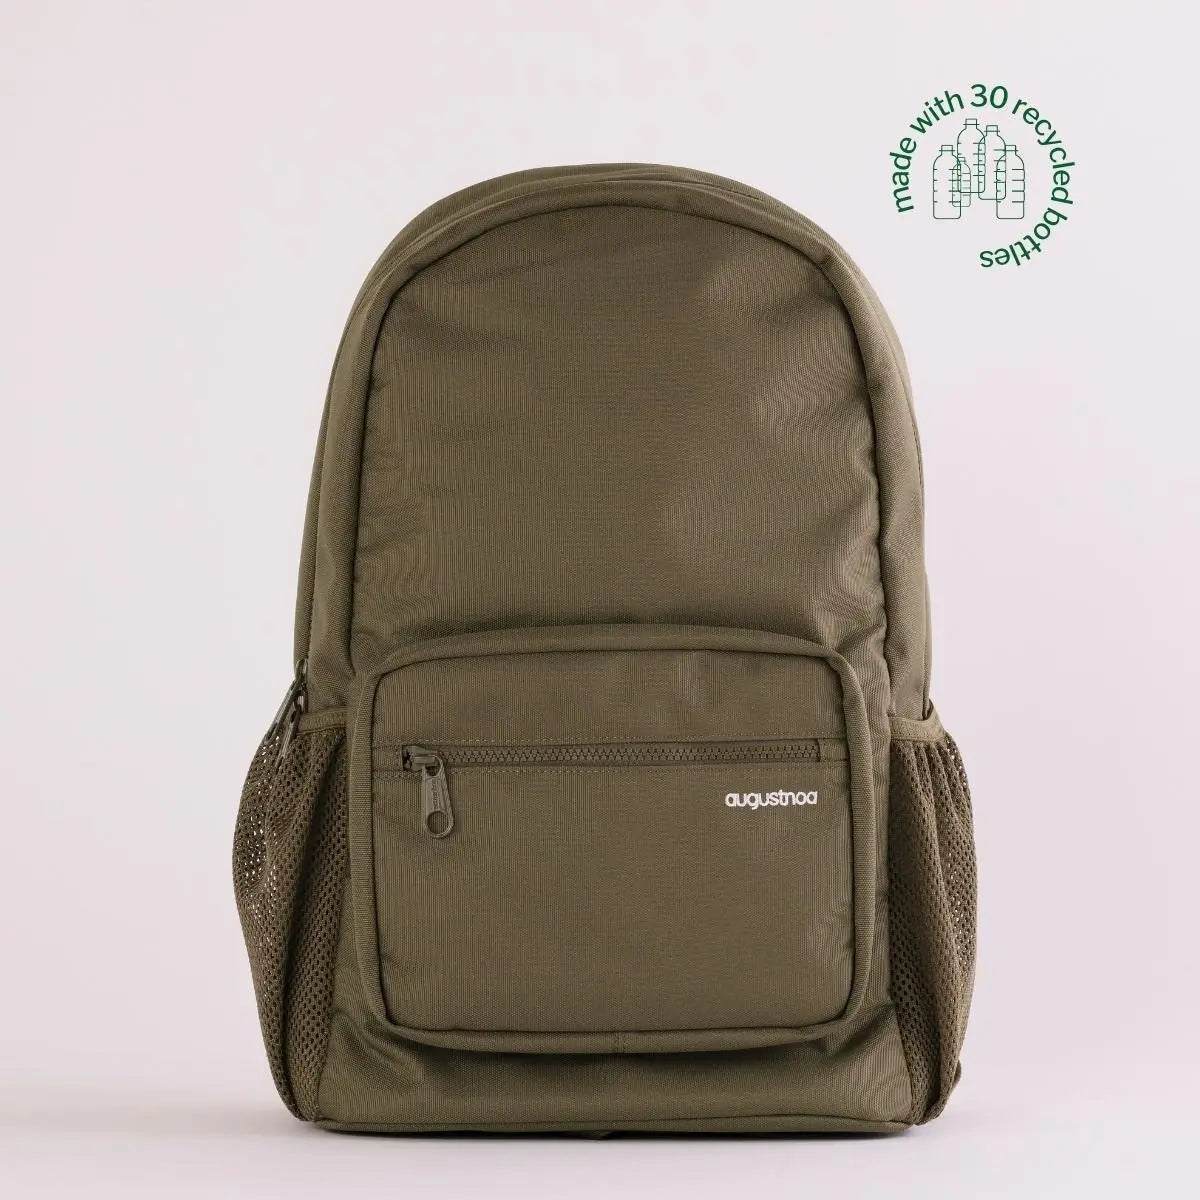 August Noa travel backpack in olive. Front view.